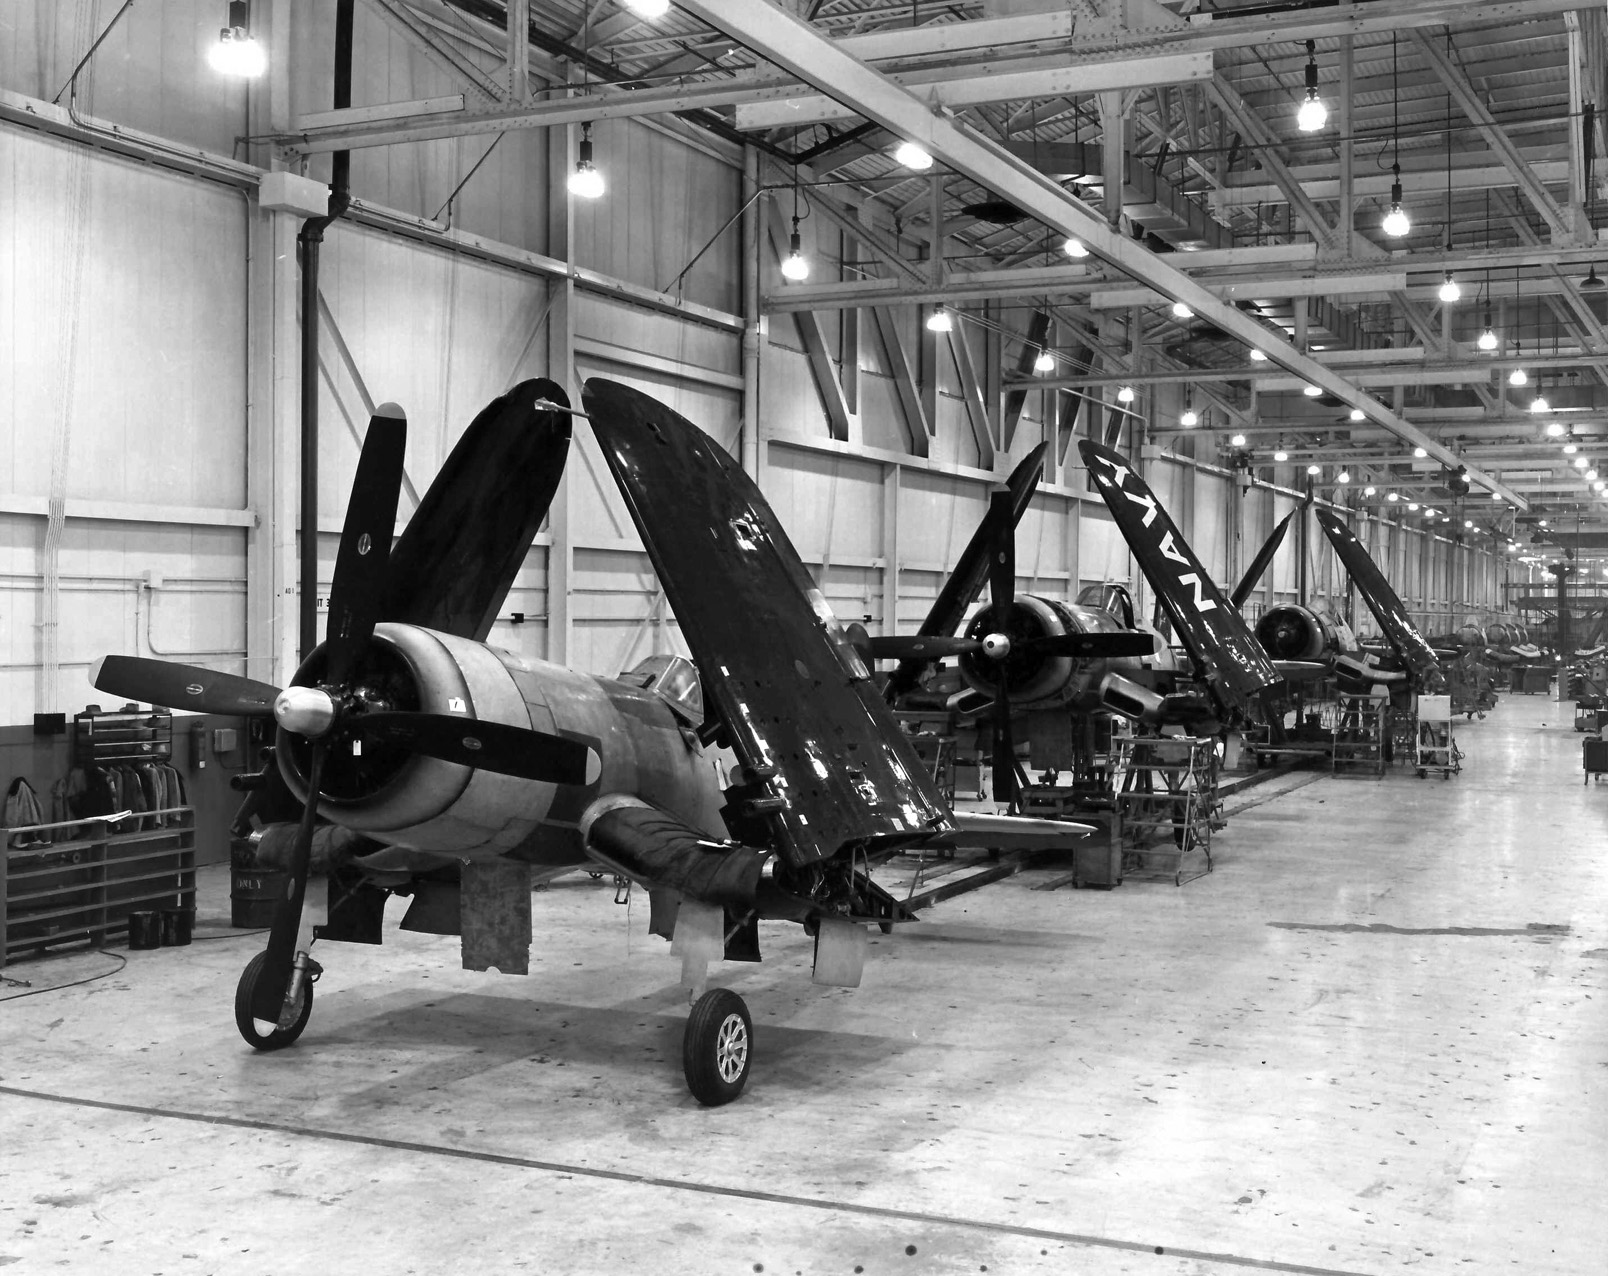 Chance Vought produced the gull-wing F4U Corsair for the Navy but, when demand exceeded the company’s capabilities, the contract was outsourced to Goodyear and Brewster.